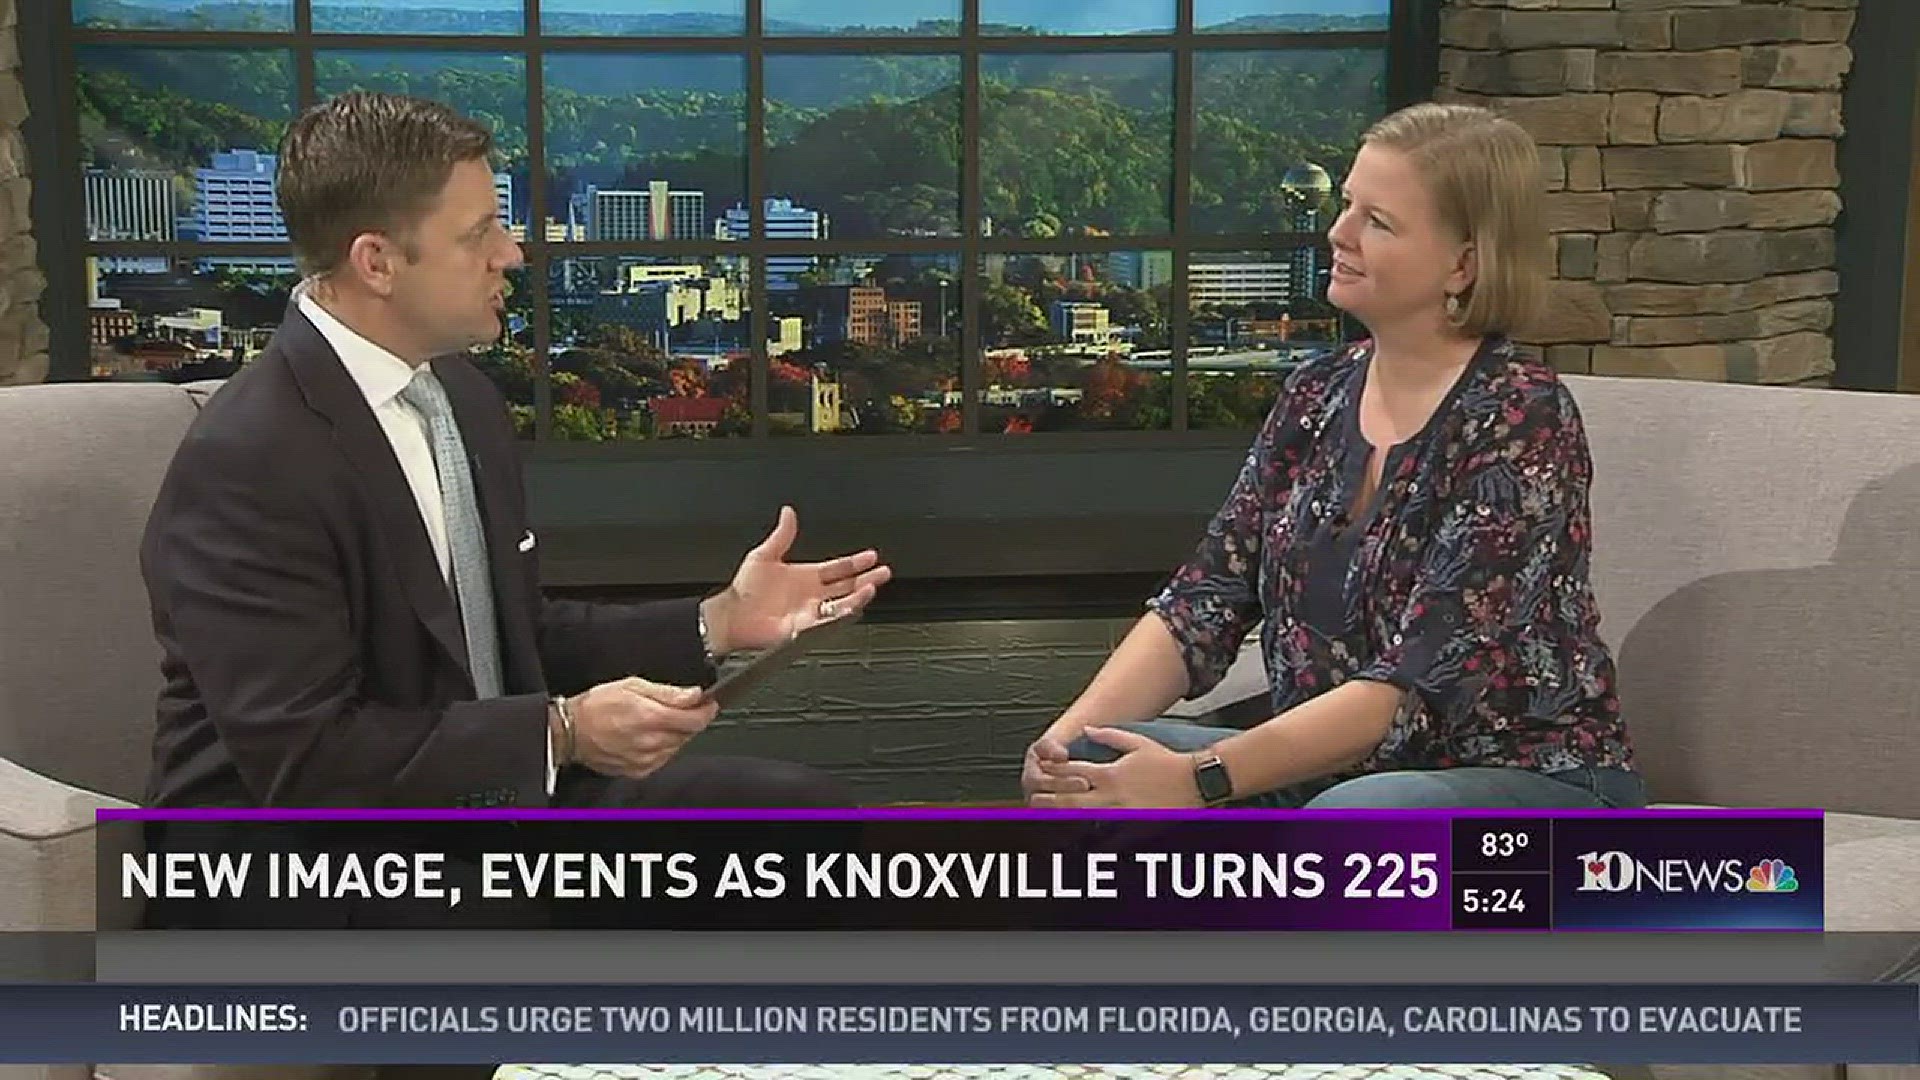 Oct. 6, 2016: The city of Knoxville has a new creative campaign, an upgraded site for one of its most popular events and is working with lawmakers to bring more visitors to the Scruffy City.